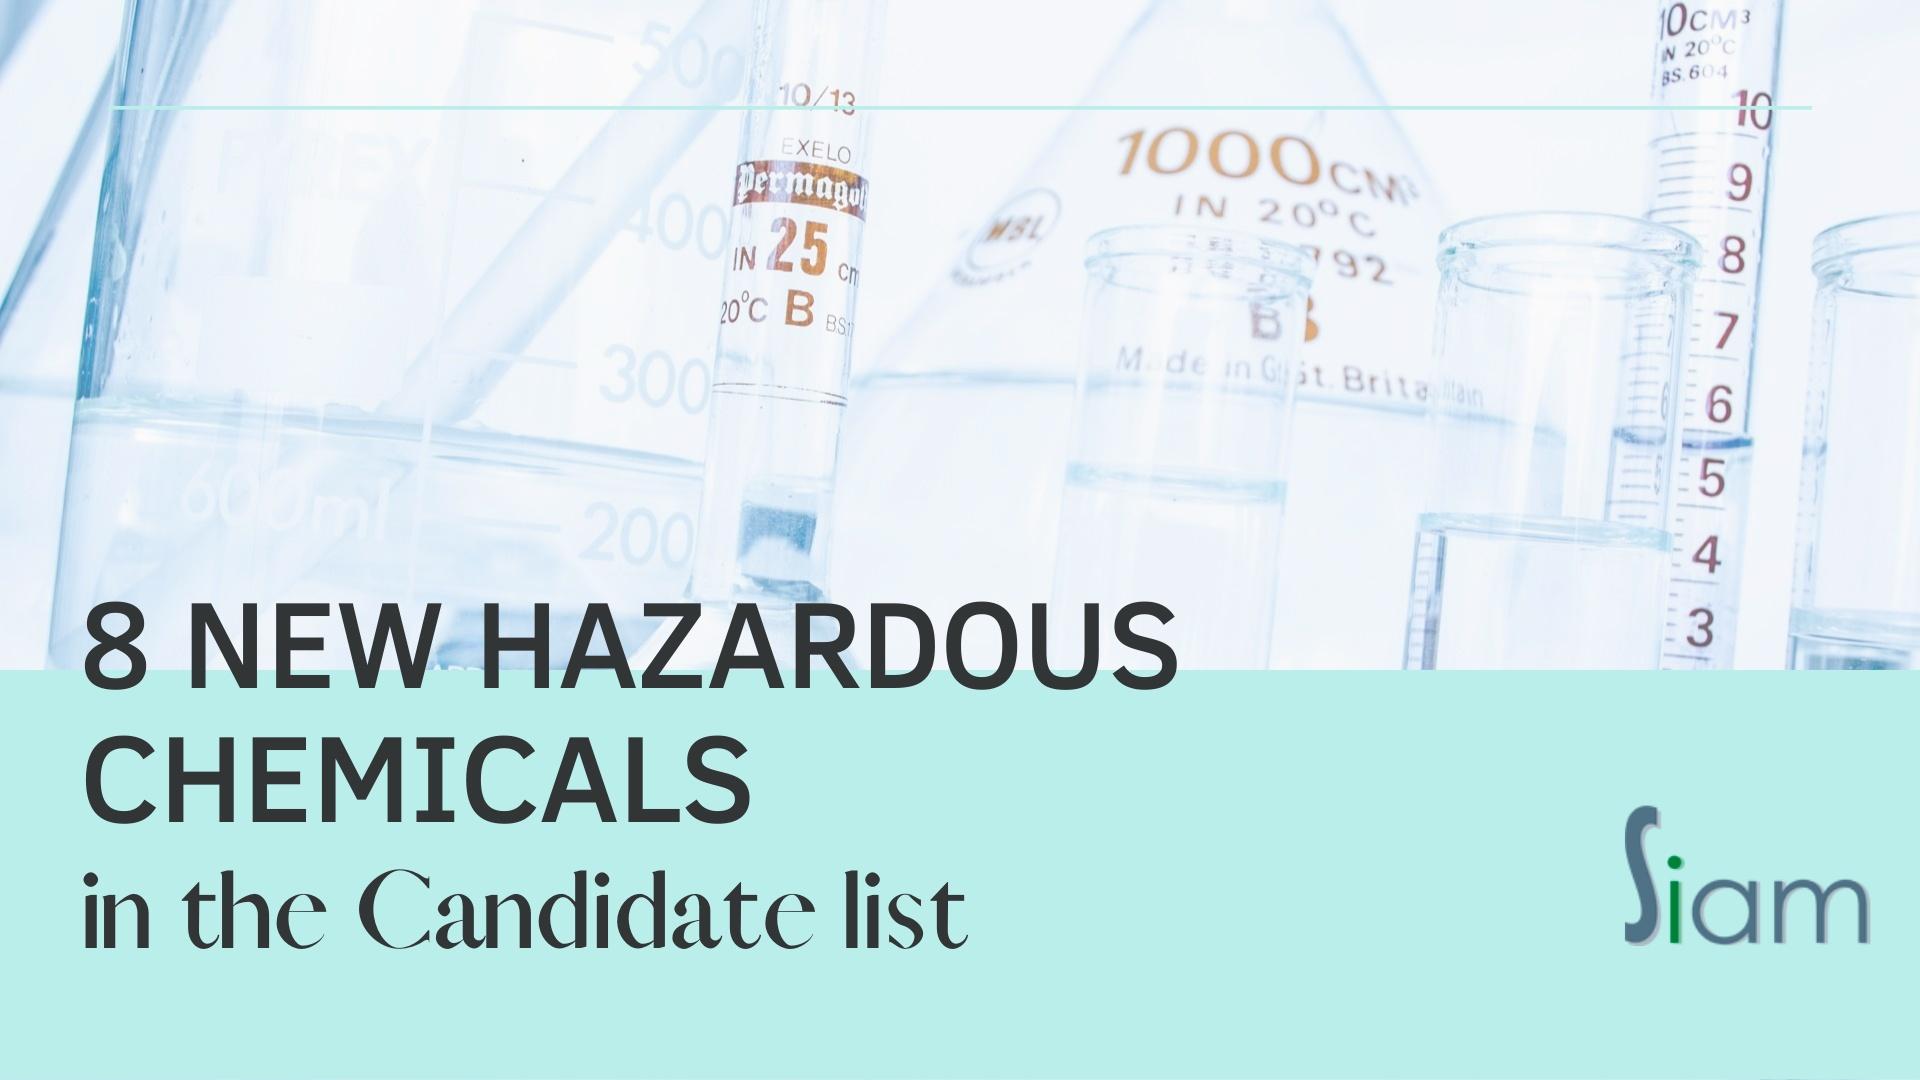 8 new additions to the Candidate List